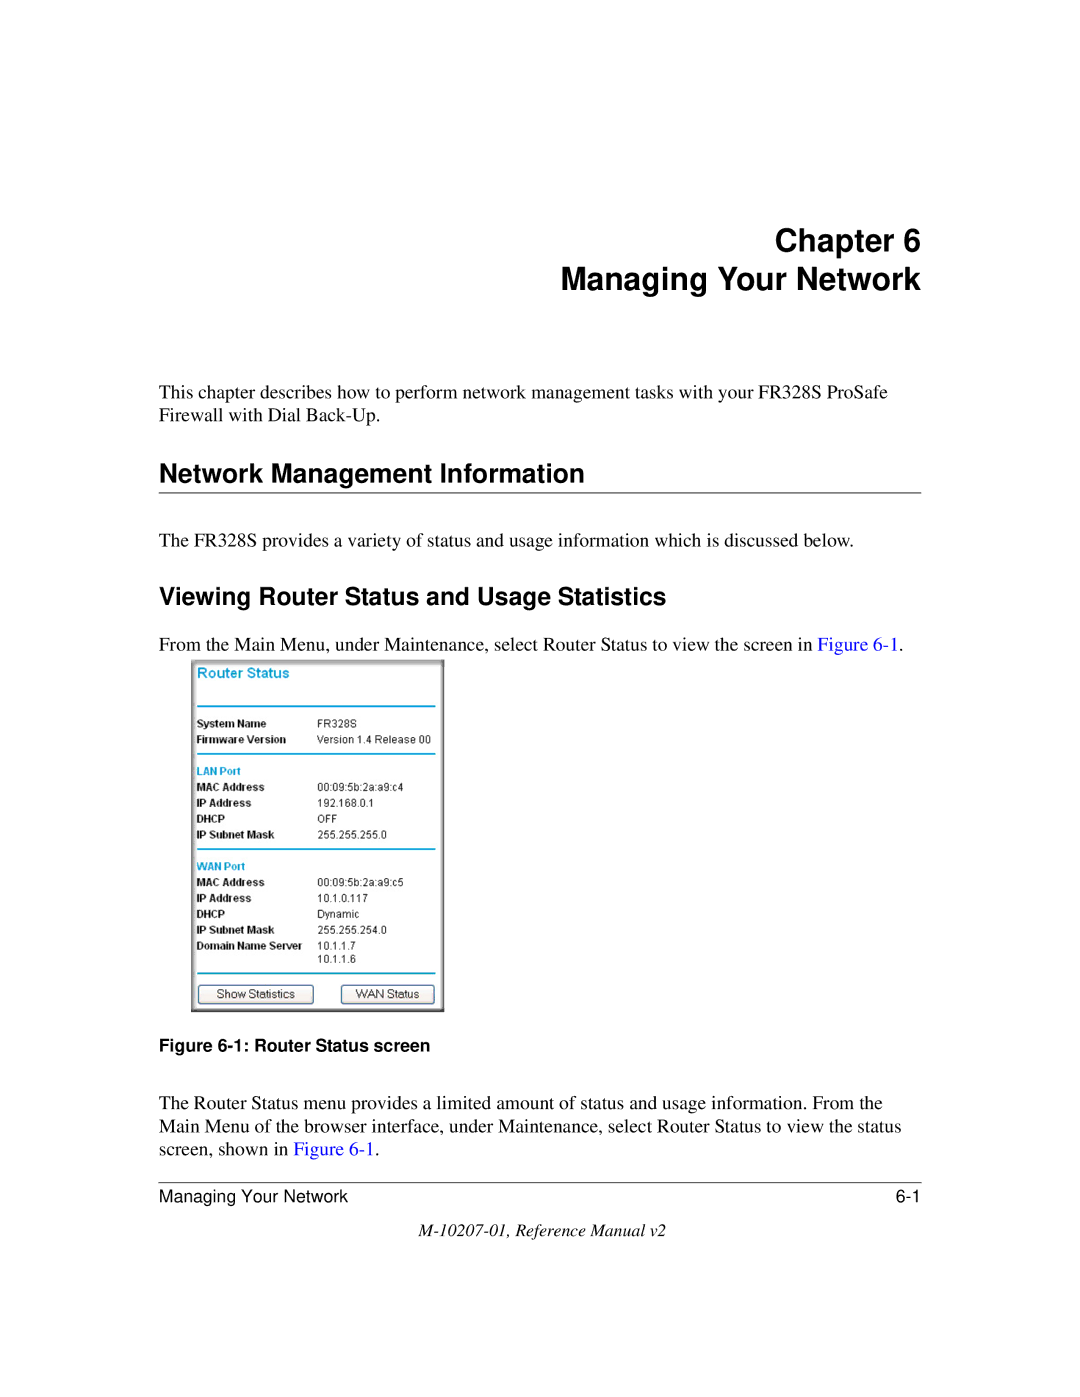 NETGEAR FR328S Chapter Managing Your Network, Network Management Information, Viewing Router Status and Usage Statistics 